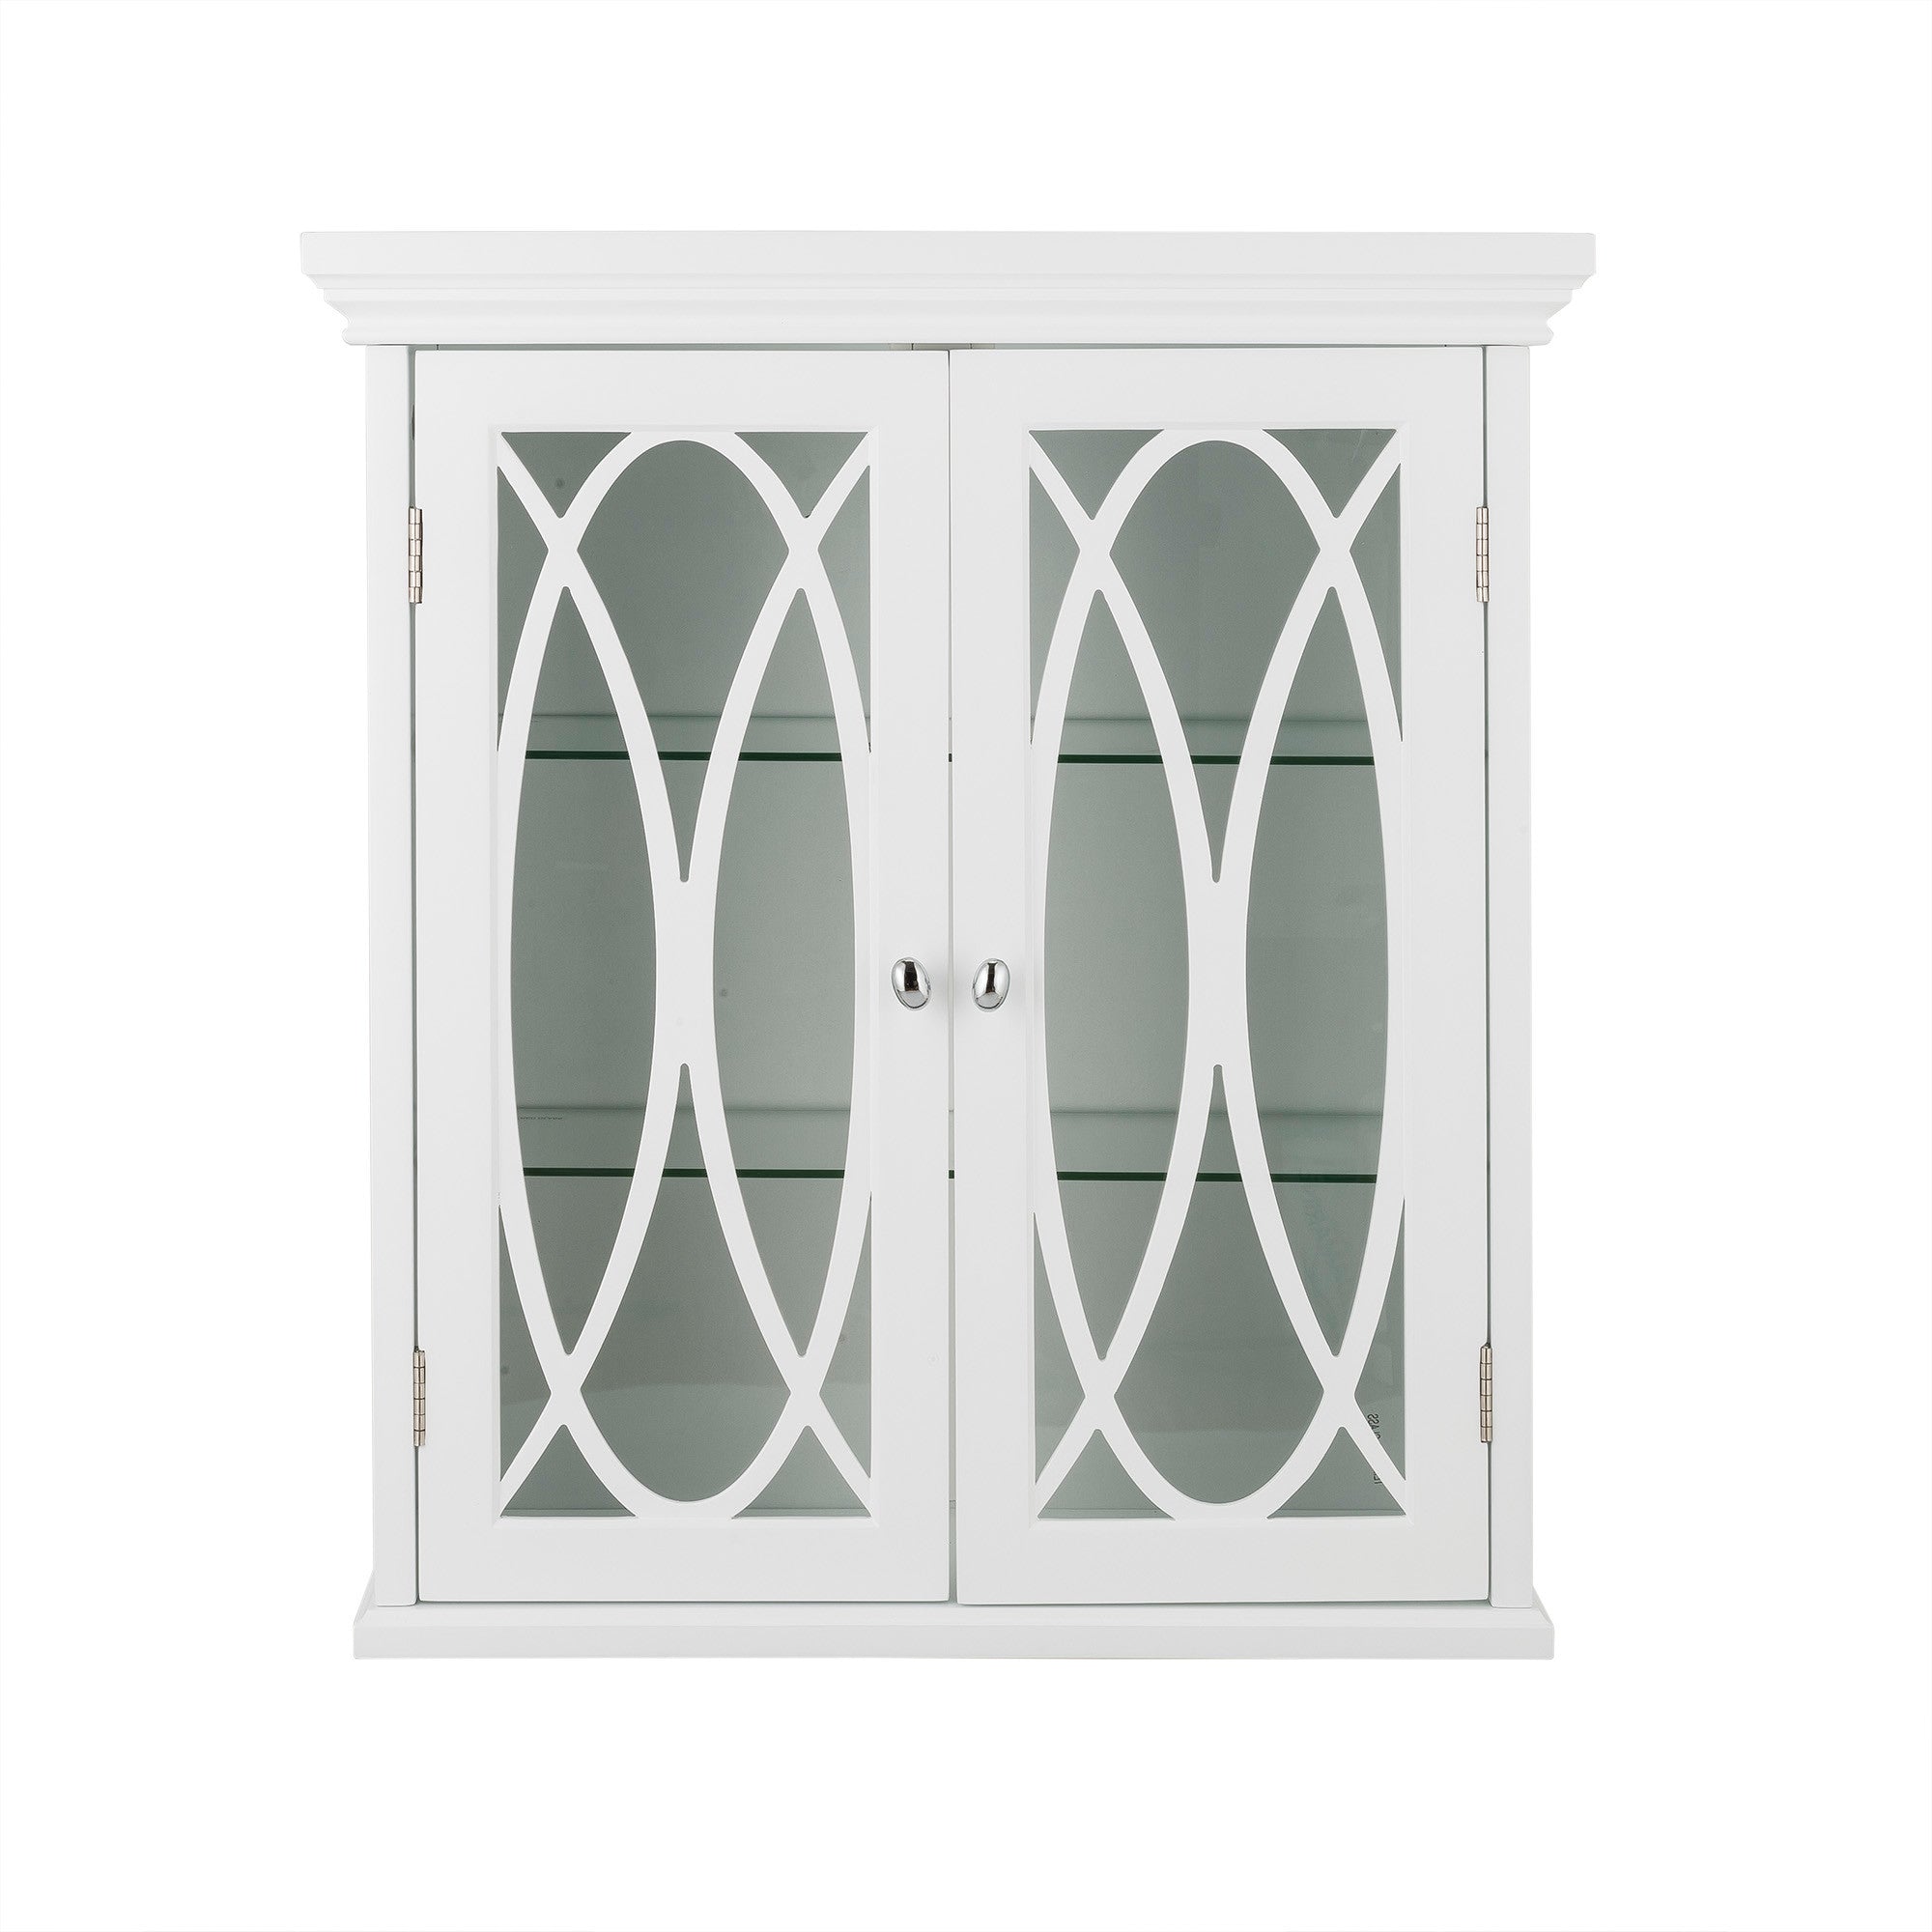 Elegant Home Fashions Florence 2 Door Removable Wooden Wall Cabinet- White